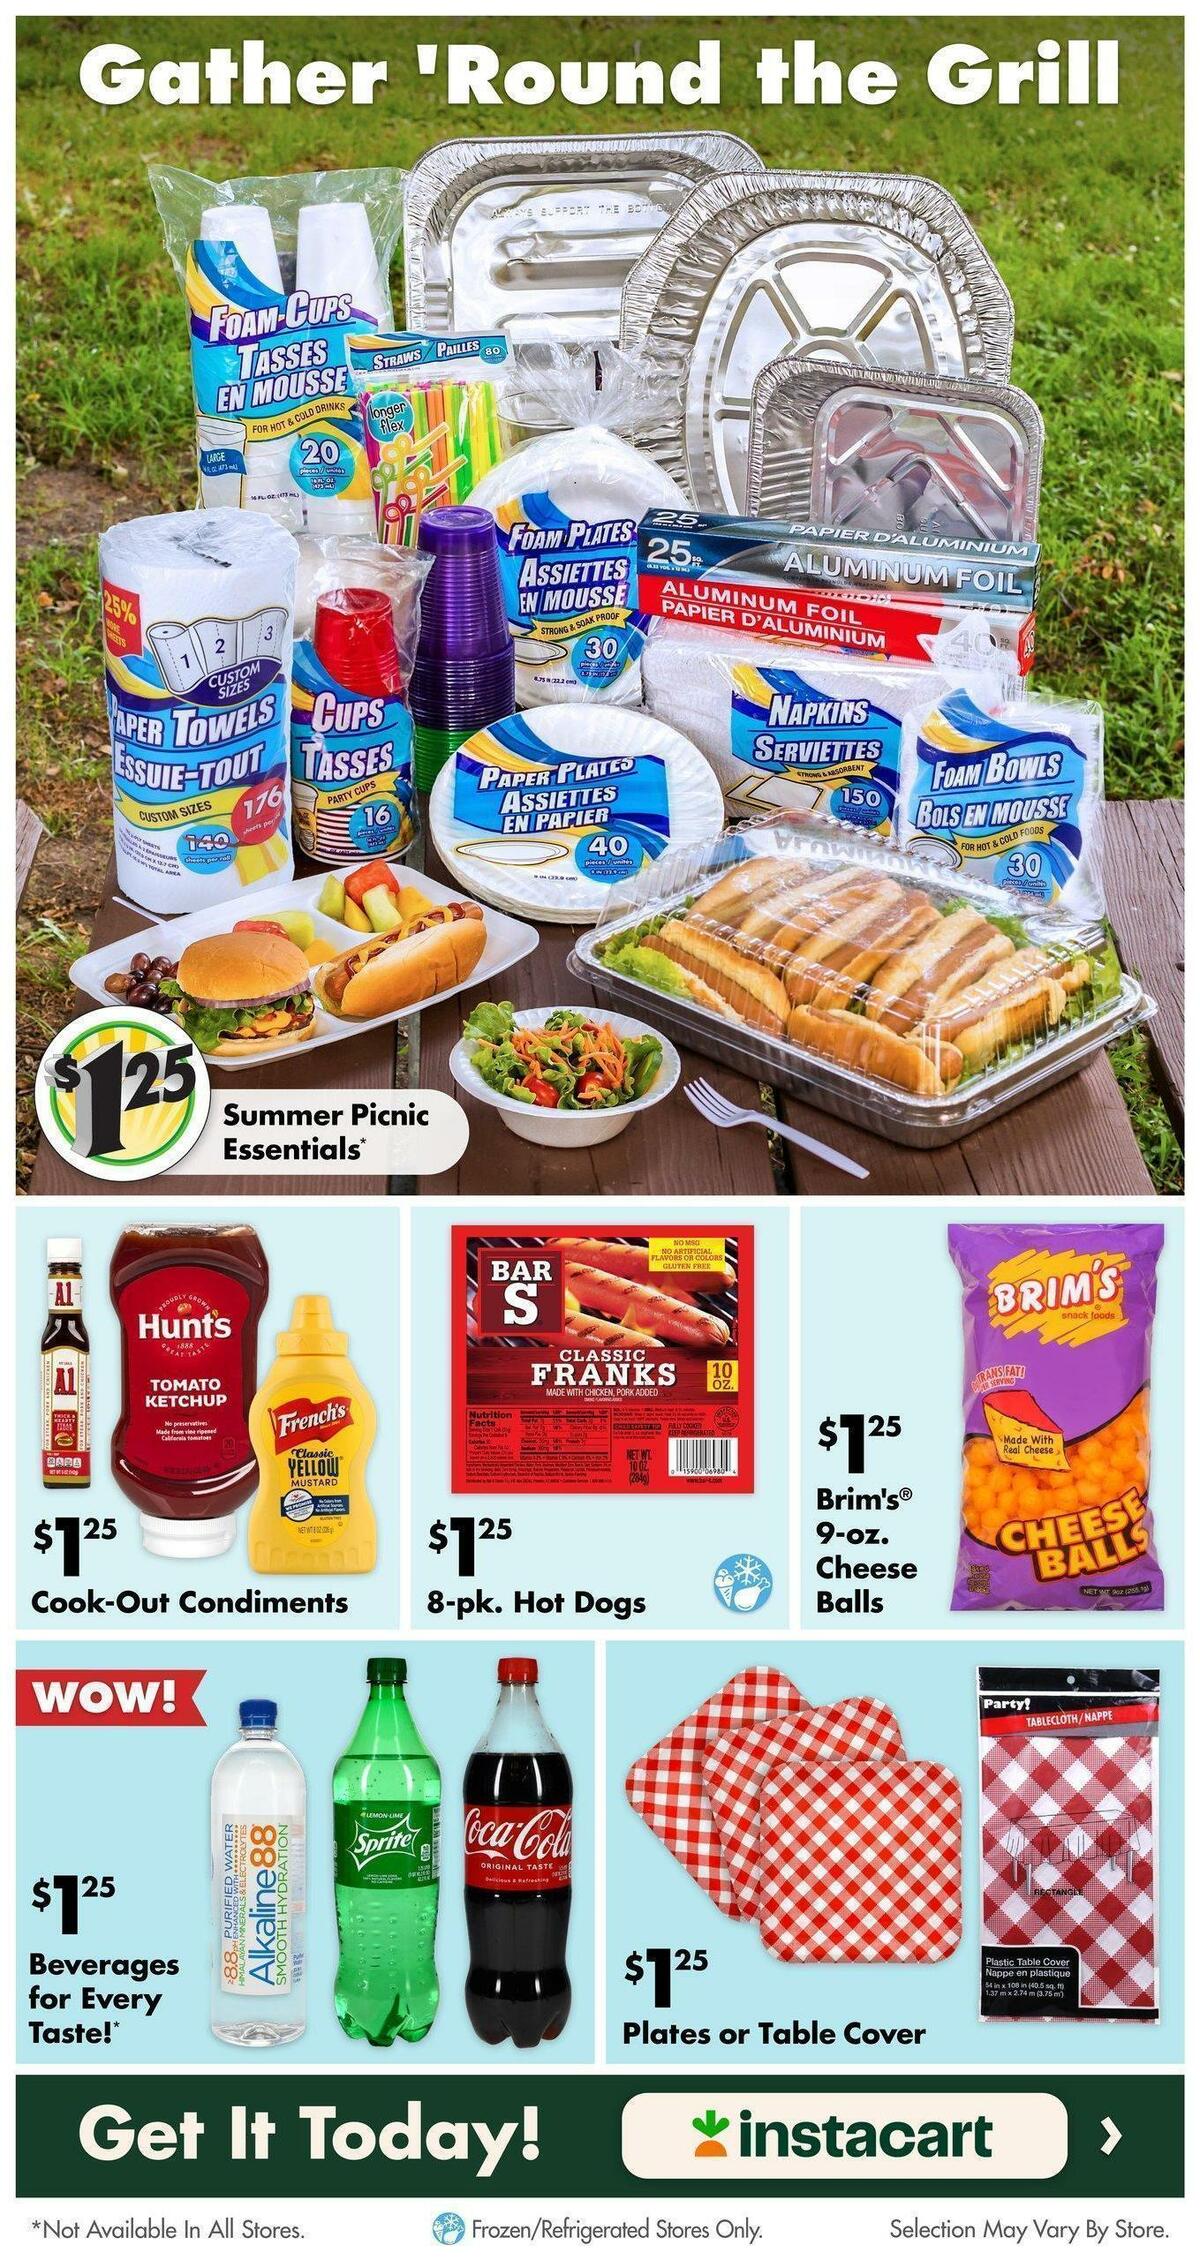 Dollar Tree Weekly Ad from April 30